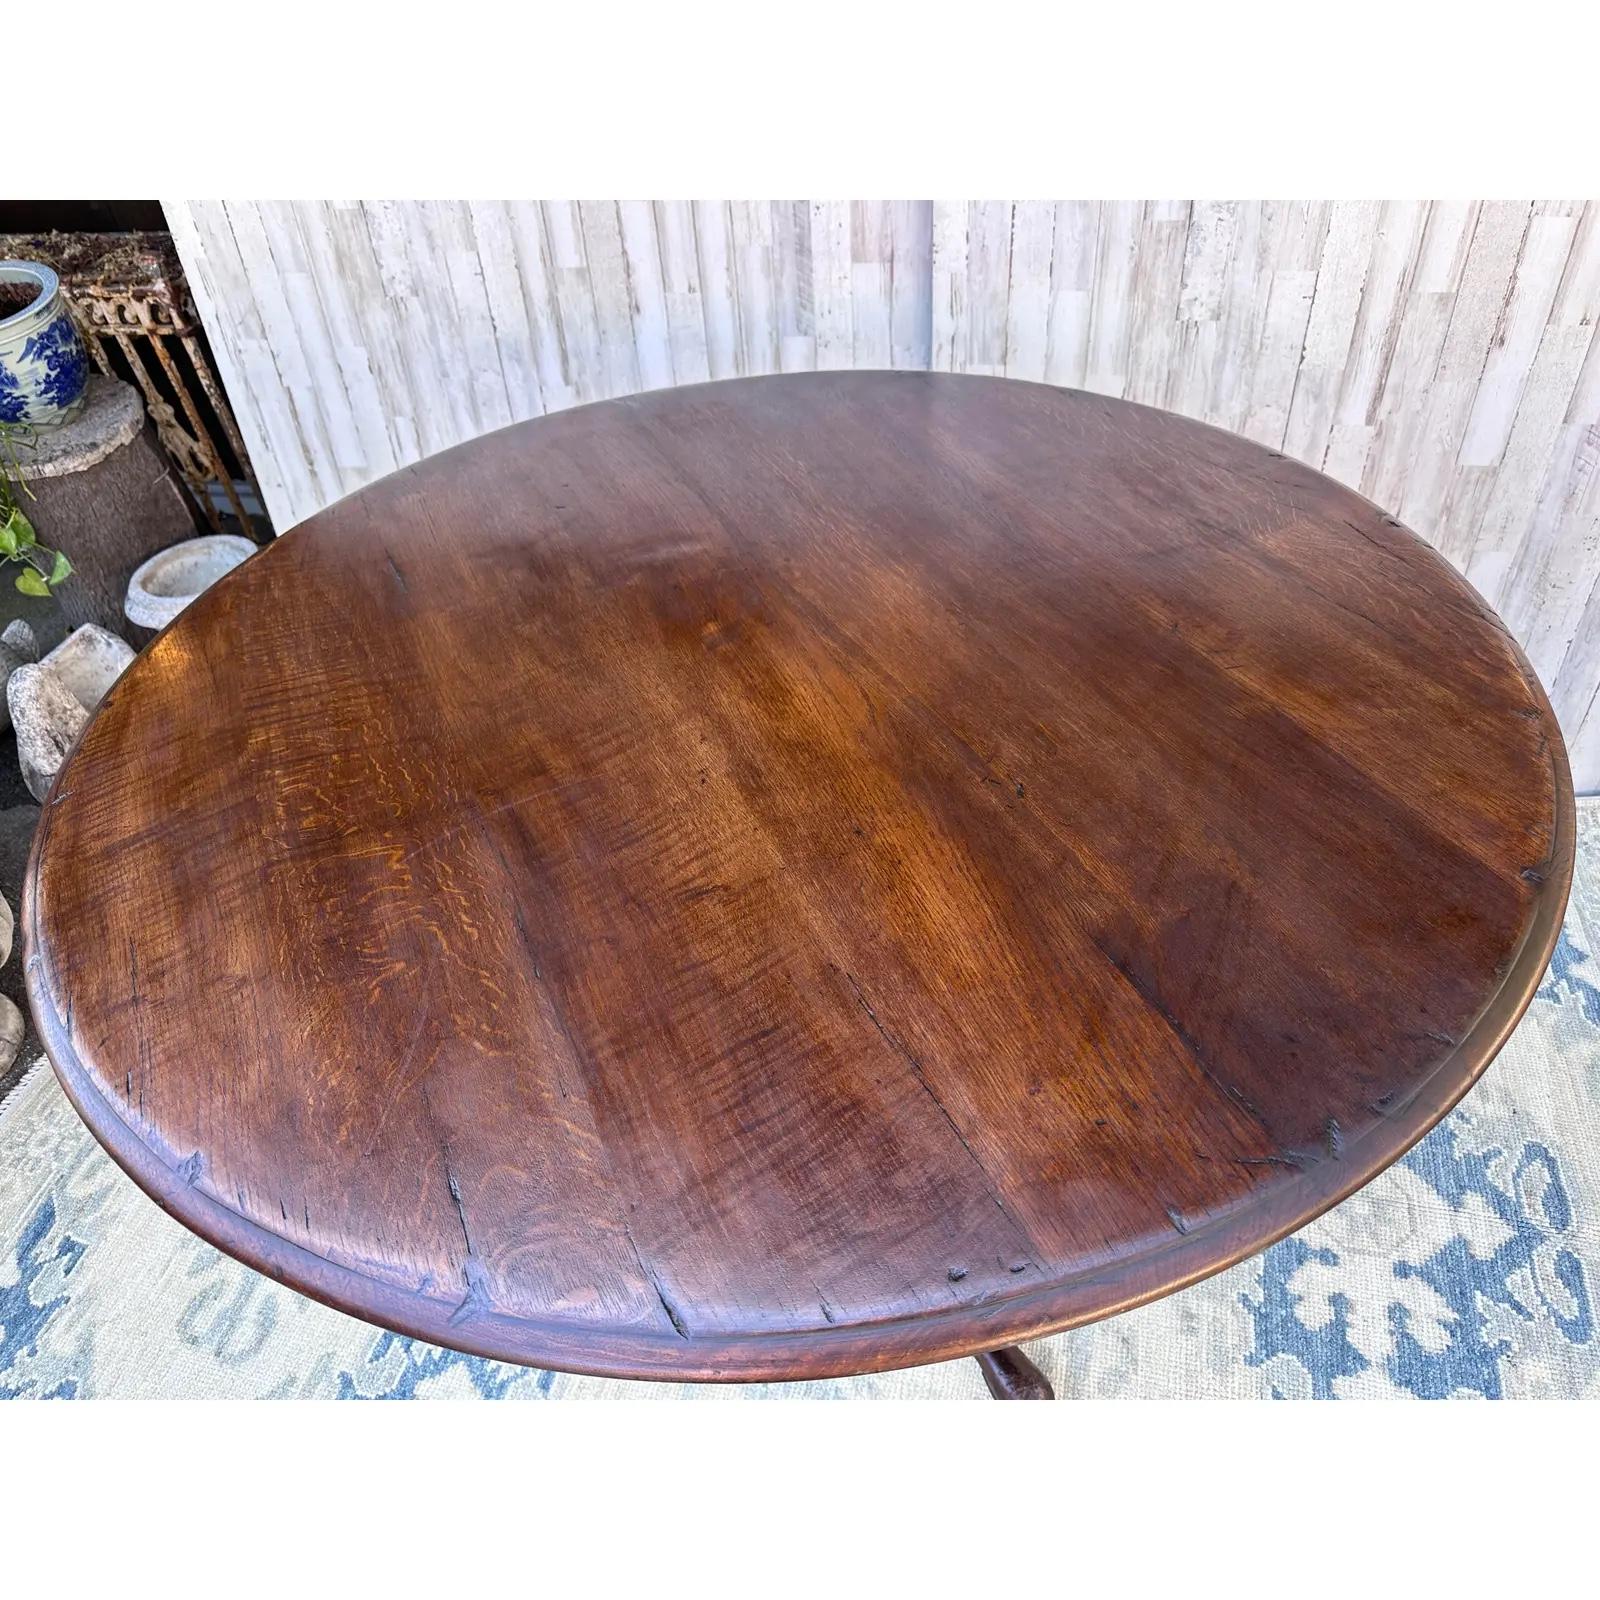 This is a excellent little 48 inch English breakfast room table it’s not an antique probably a vintage piece from the 70s or 80s but it’s got a beautiful distressed color solid oak with beautiful color sweeping pad feet and very unique design. 